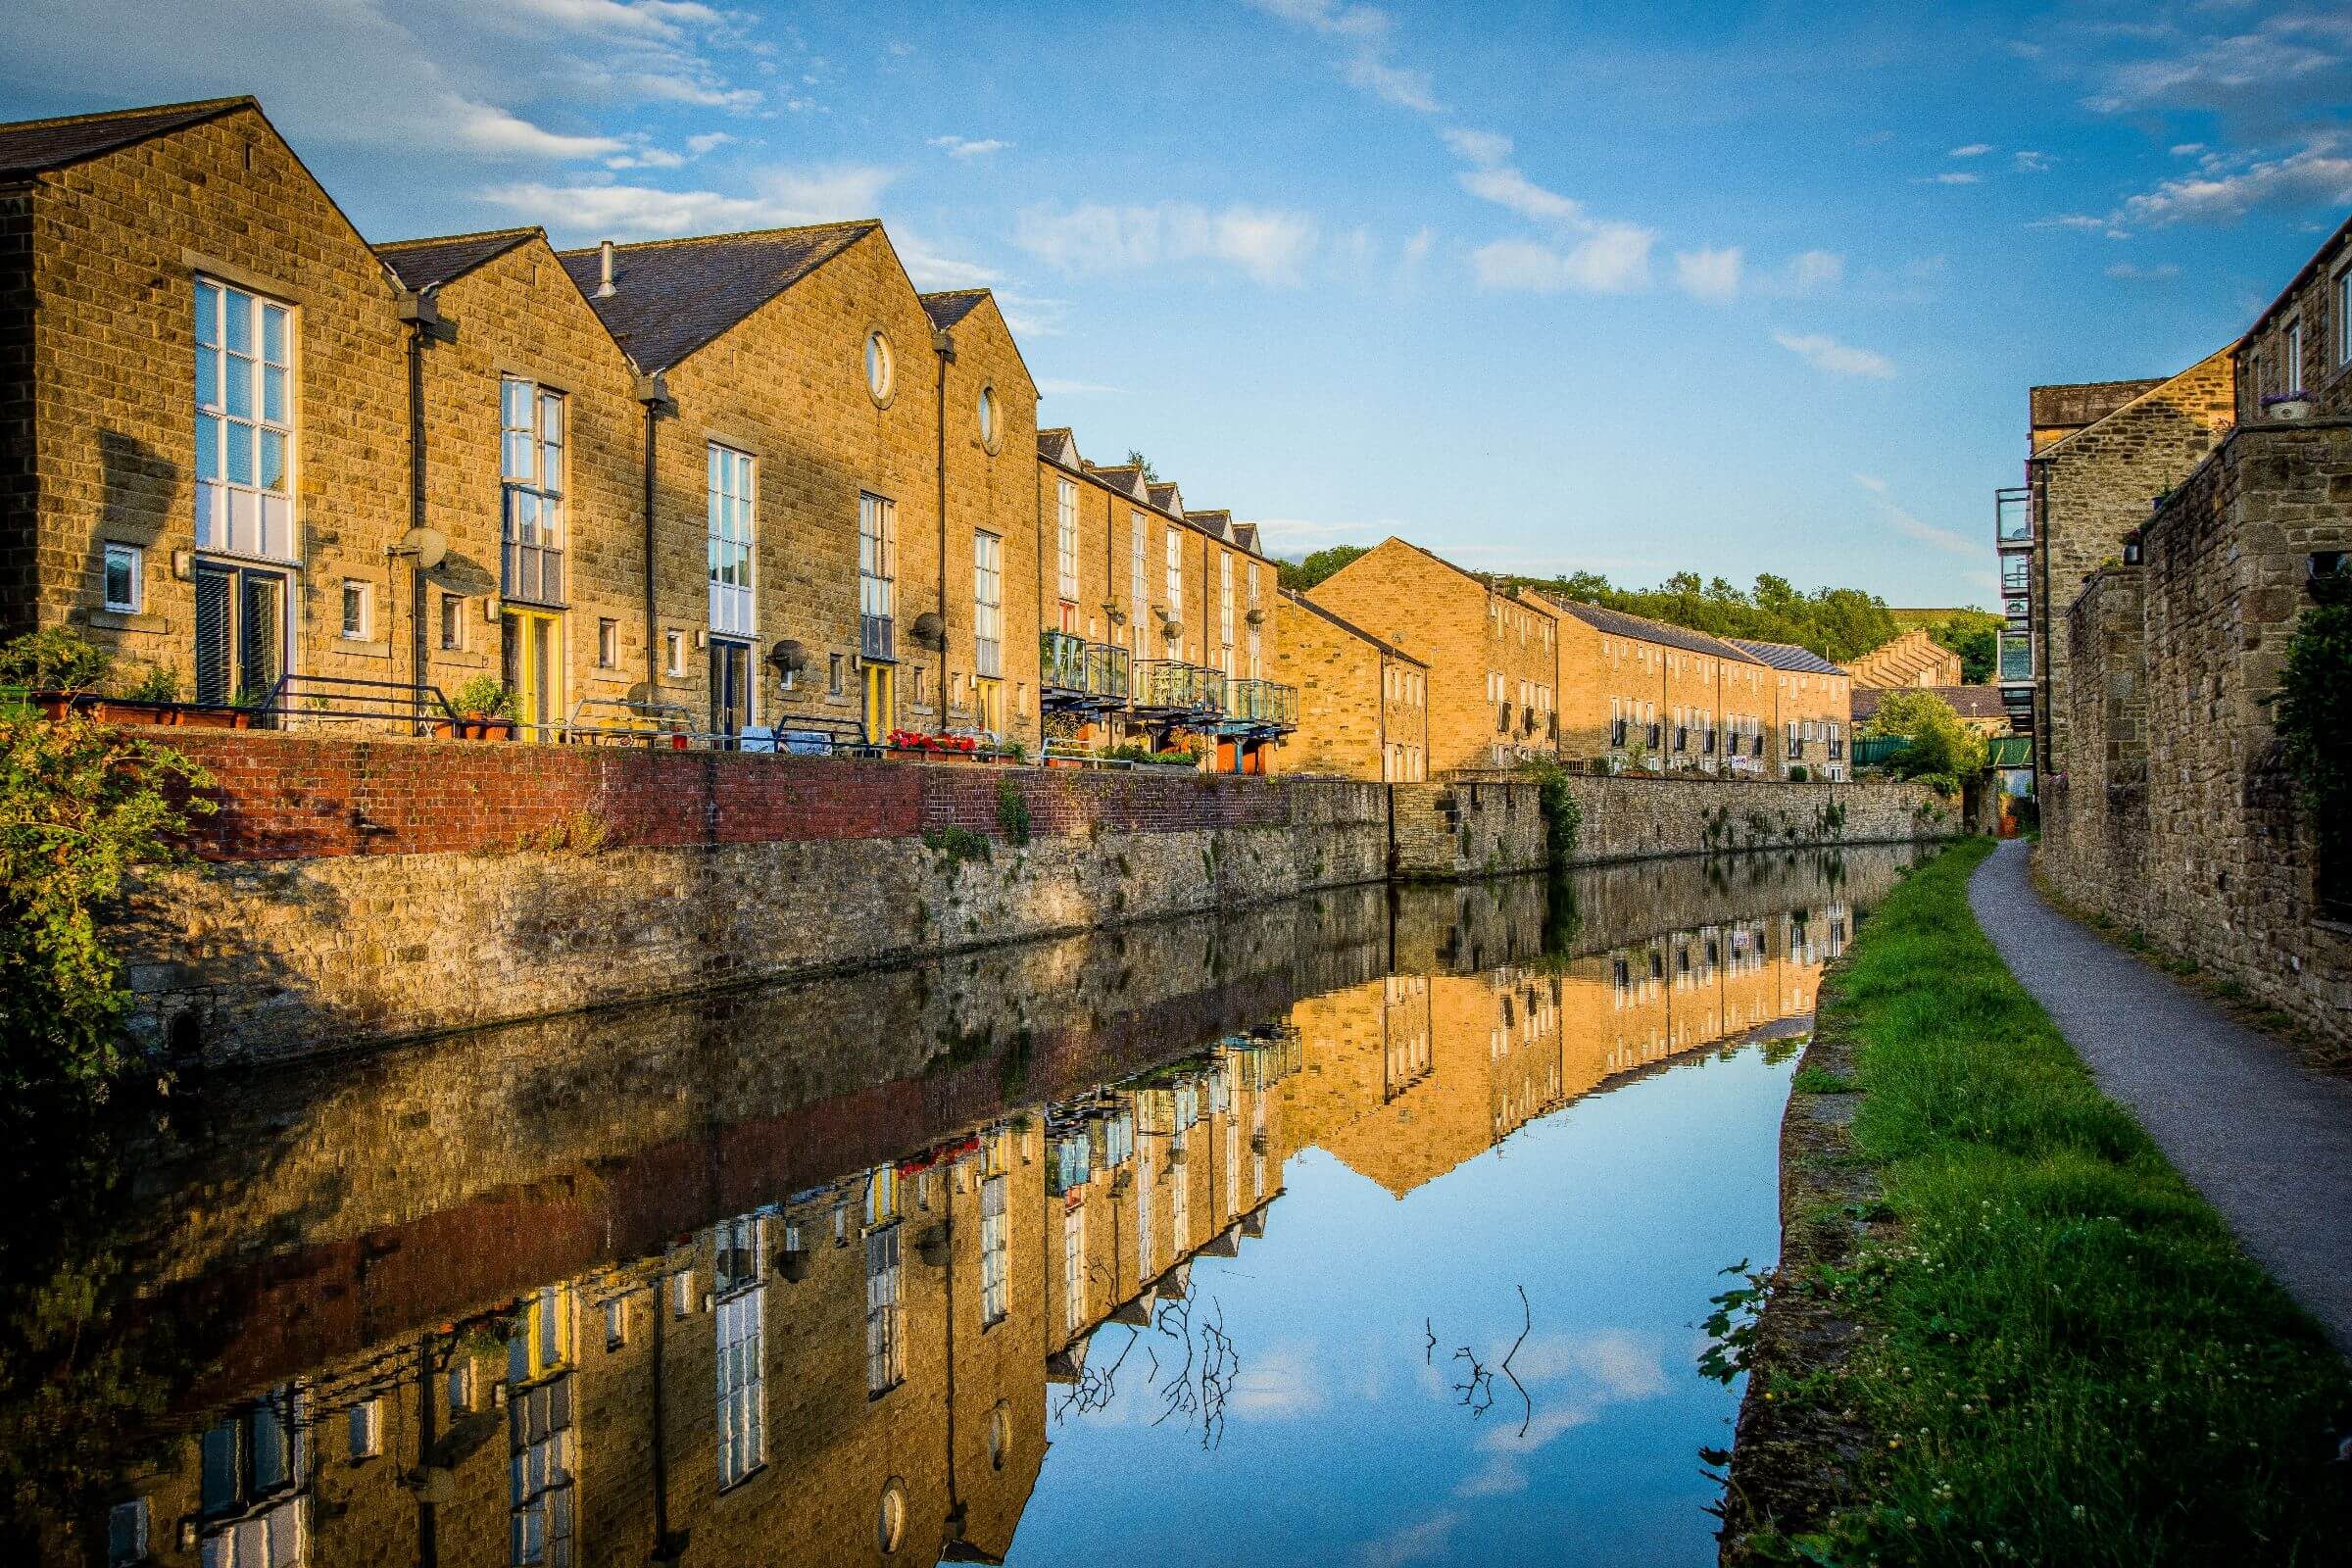 Canal in Skipton, Yorkshire Dales